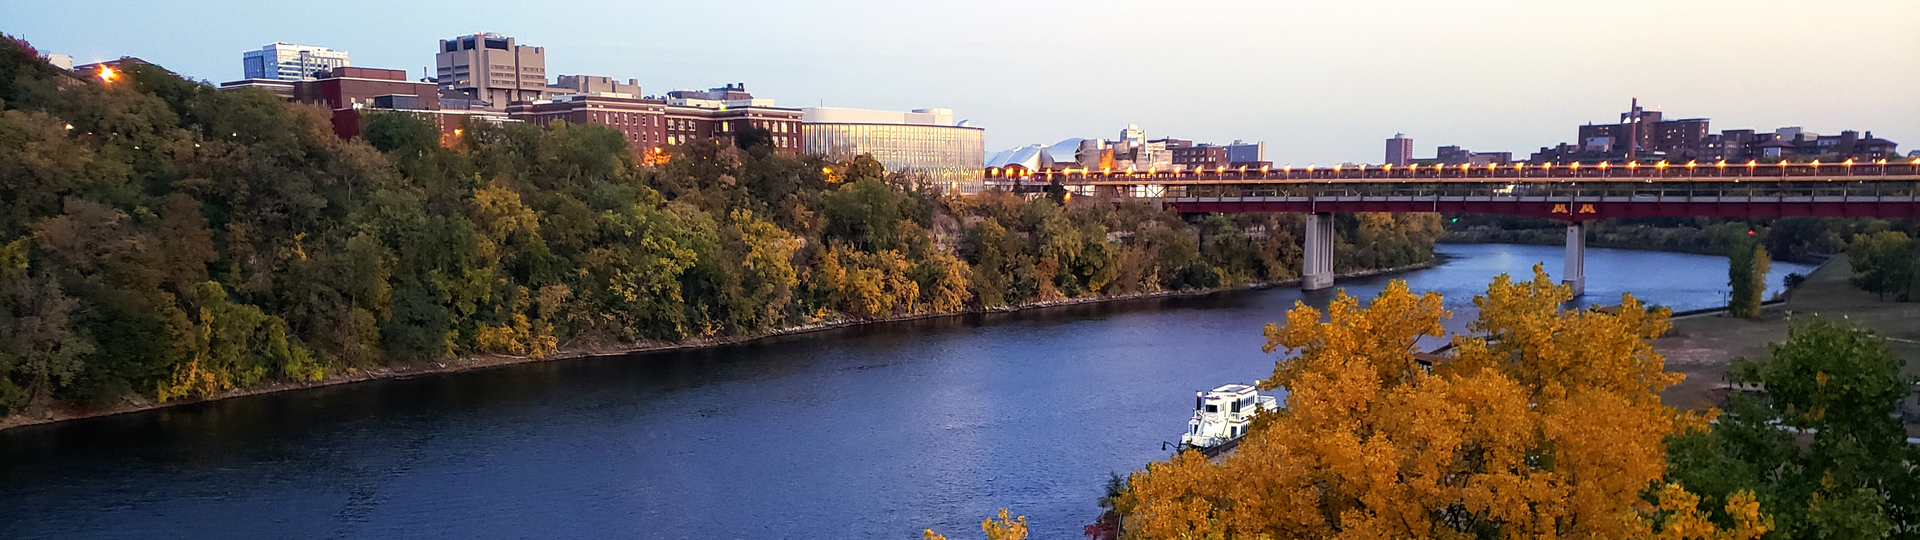 View of UMN West Bank from across Mississippi River